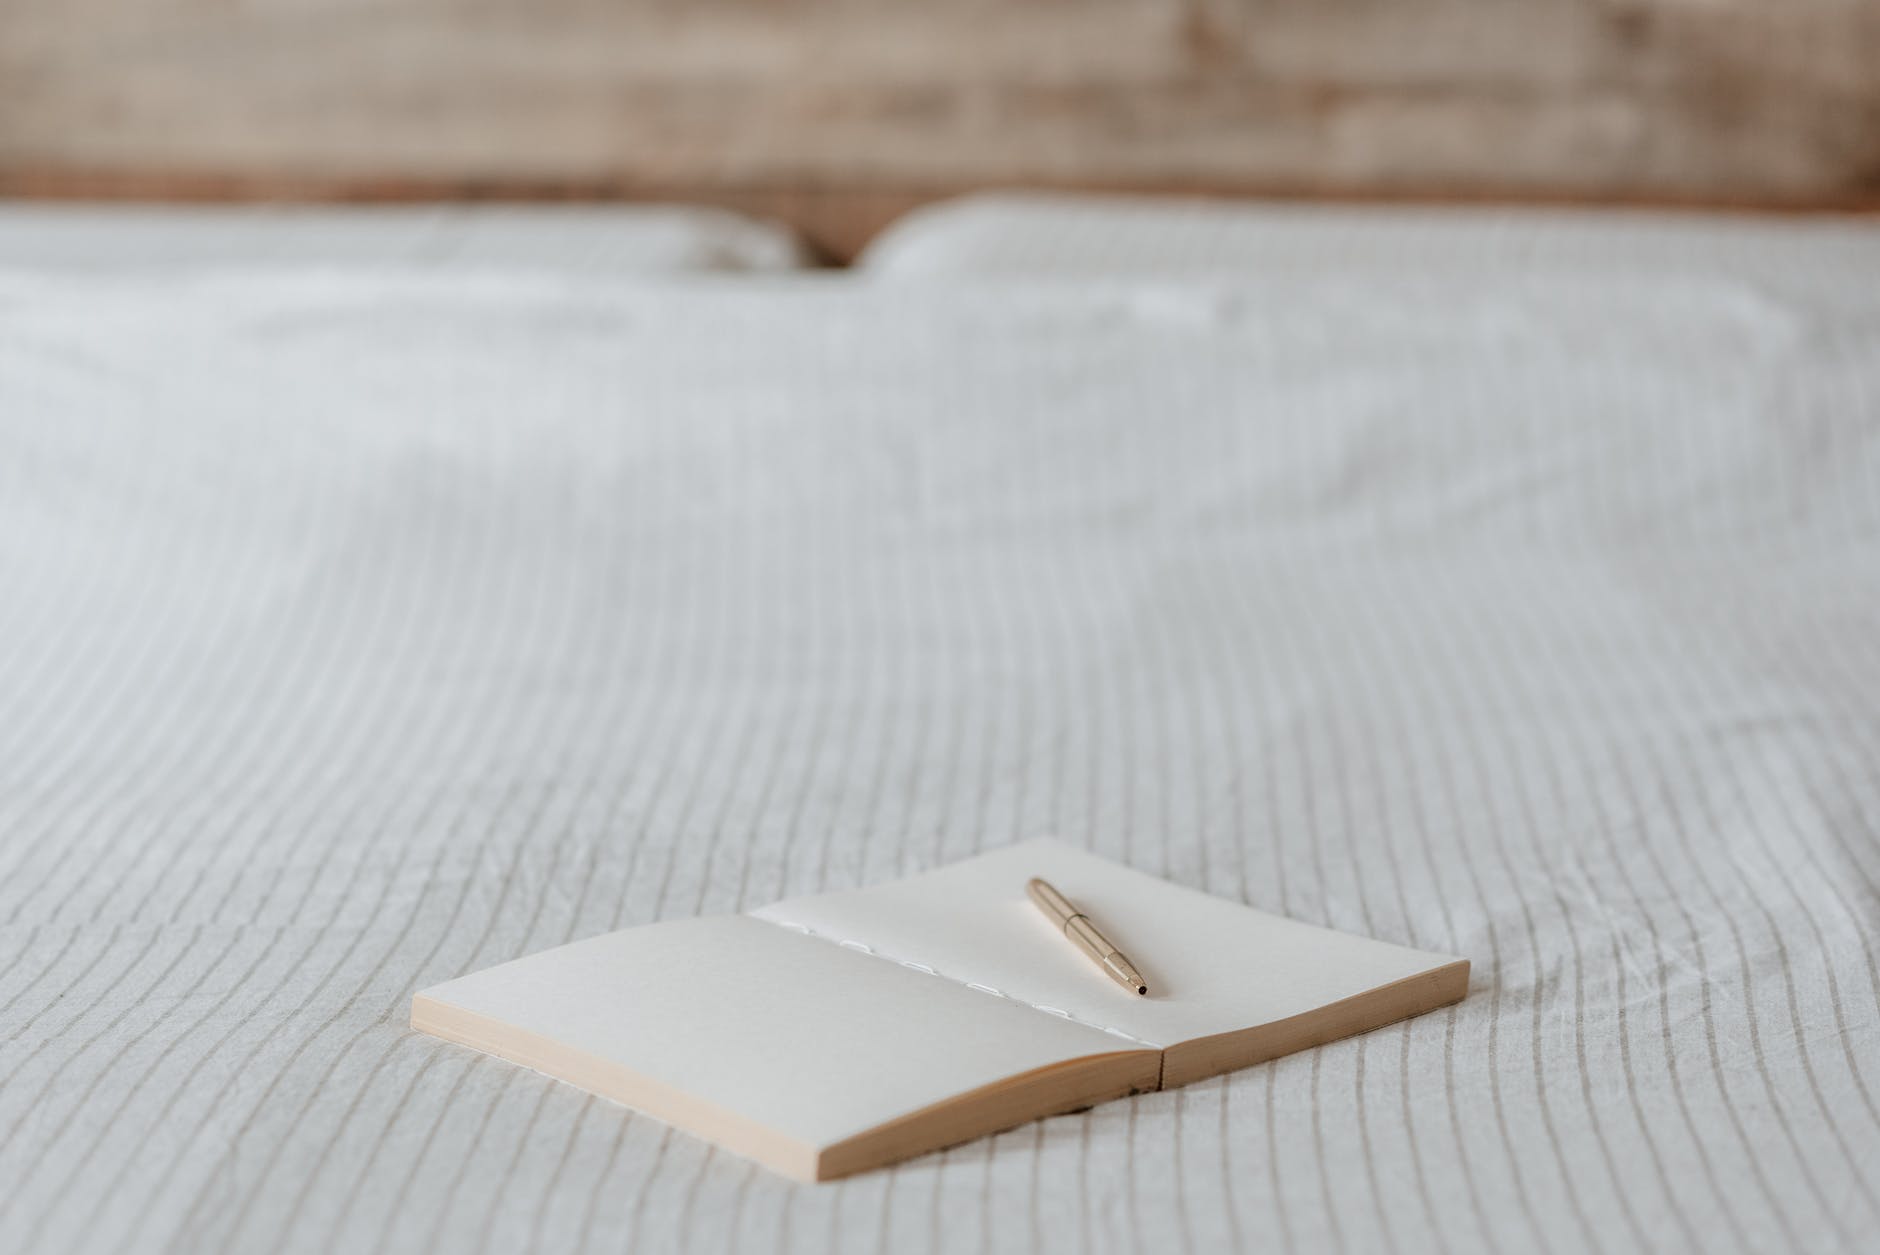 empty agenda with pen on crumpled bed in house